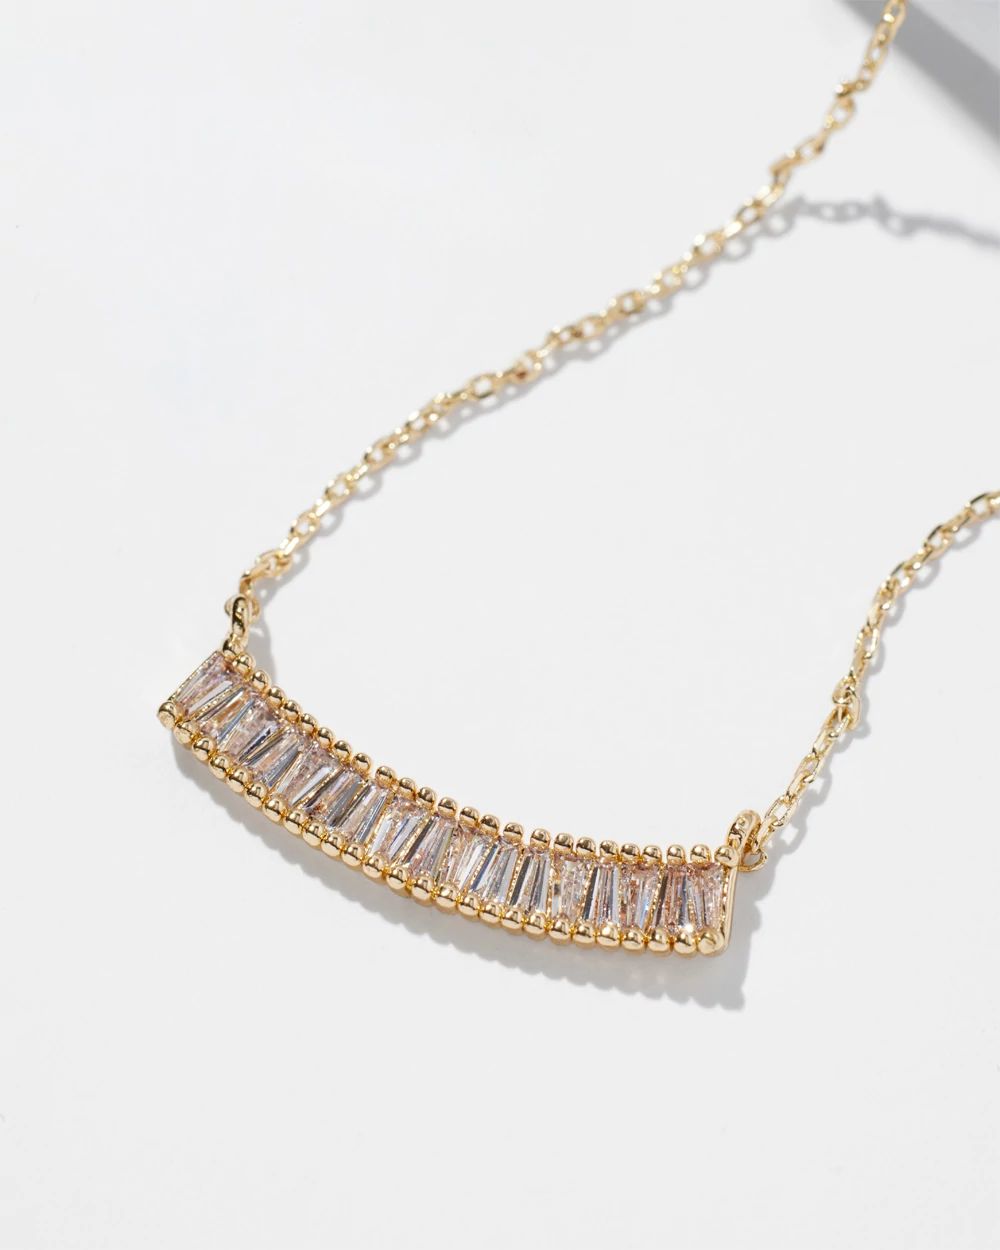 Gold Baguette Cubic Zirconia Necklace click to view larger image.